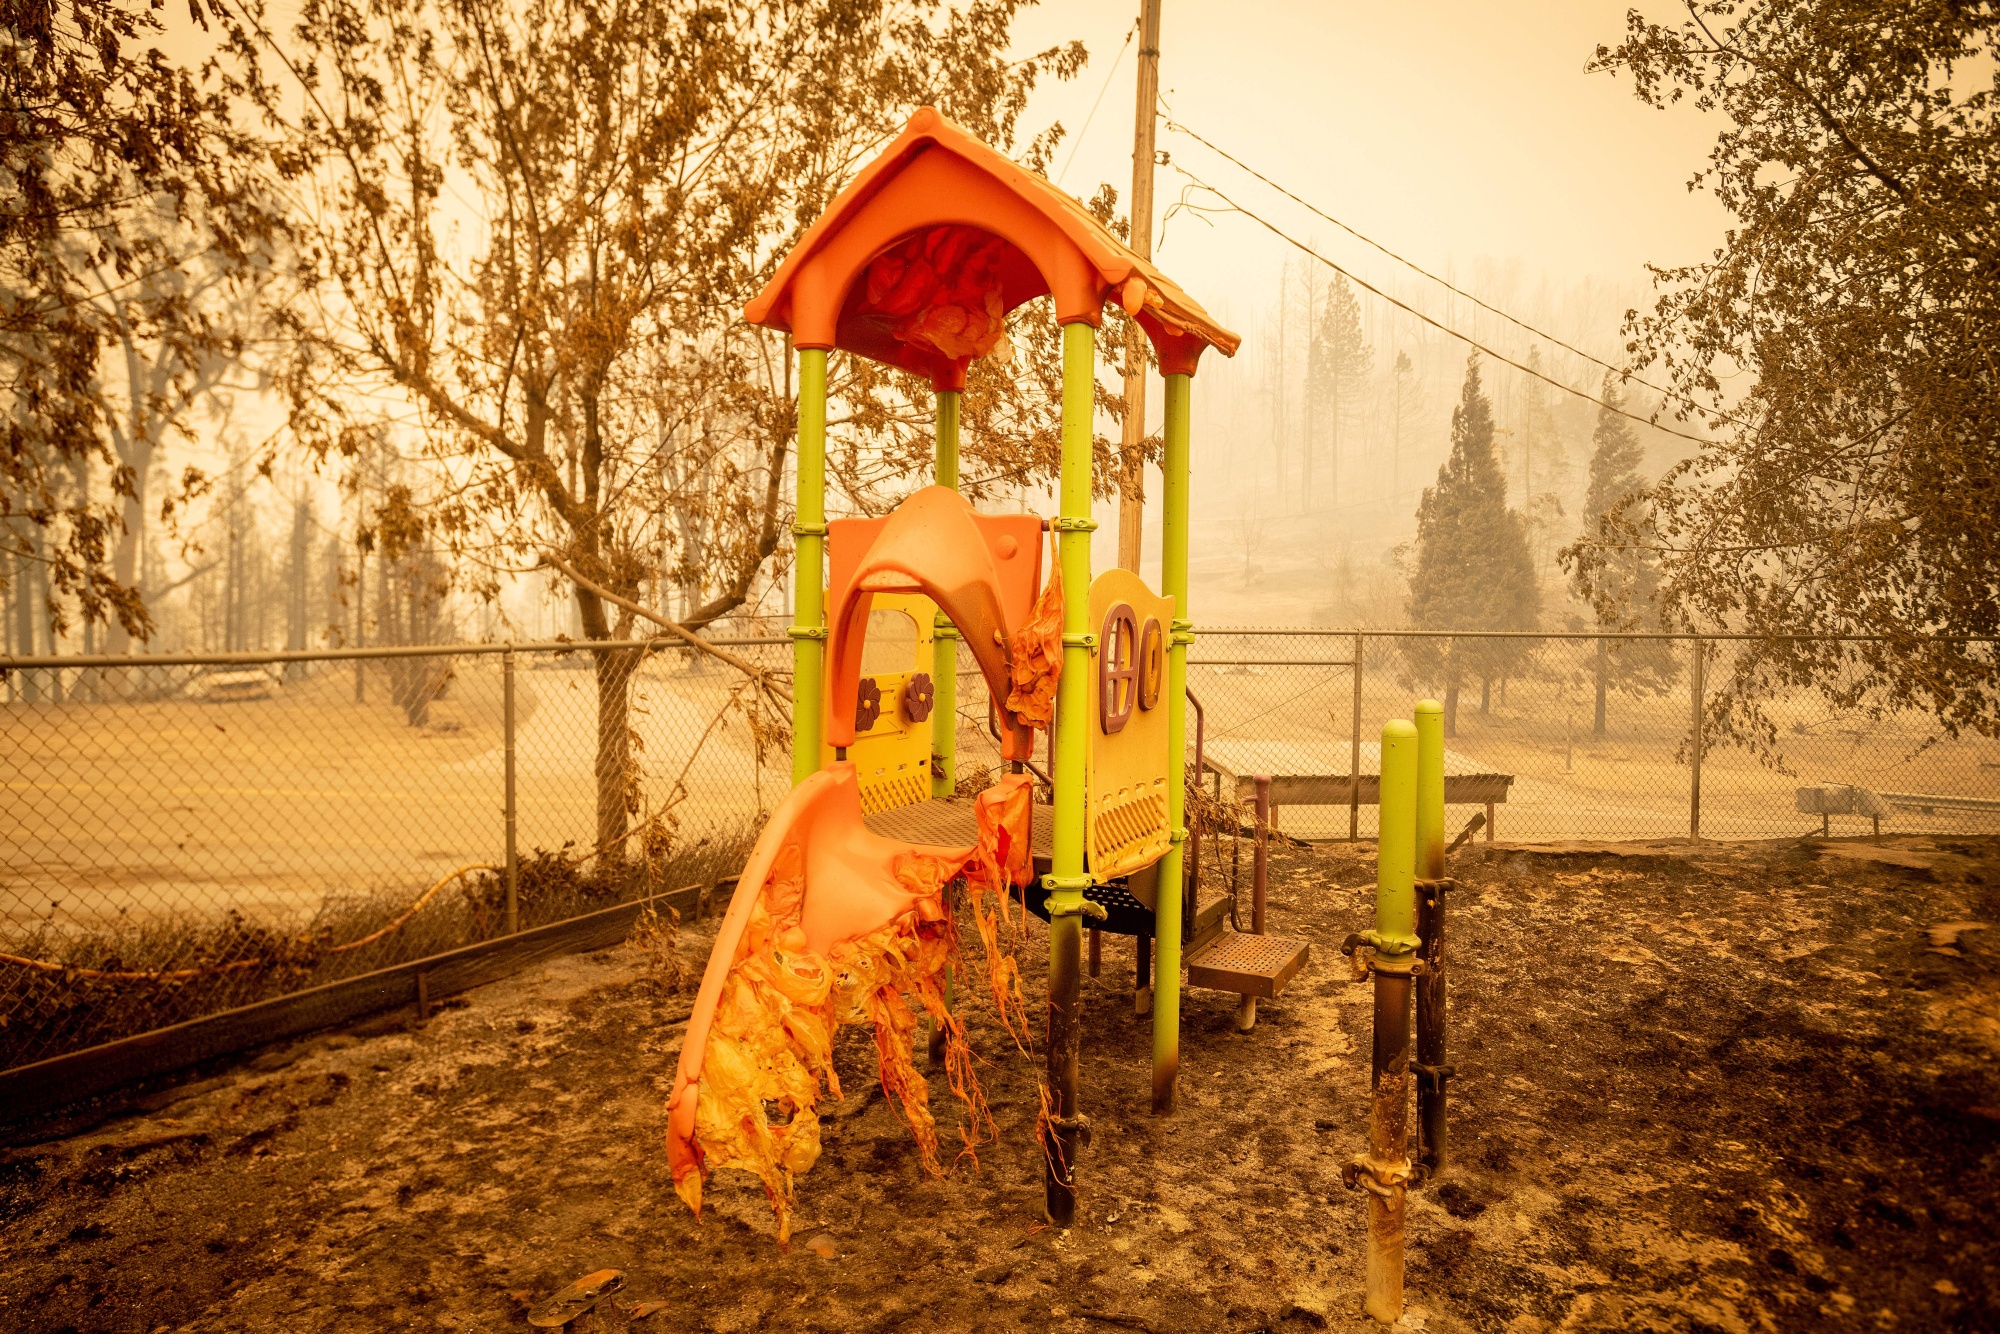 The Creek fire tore through&nbsp;the&nbsp;playground&nbsp;at Pine Ridge school&nbsp;in an unincorporated area of Fresno County, California in&nbsp;September.